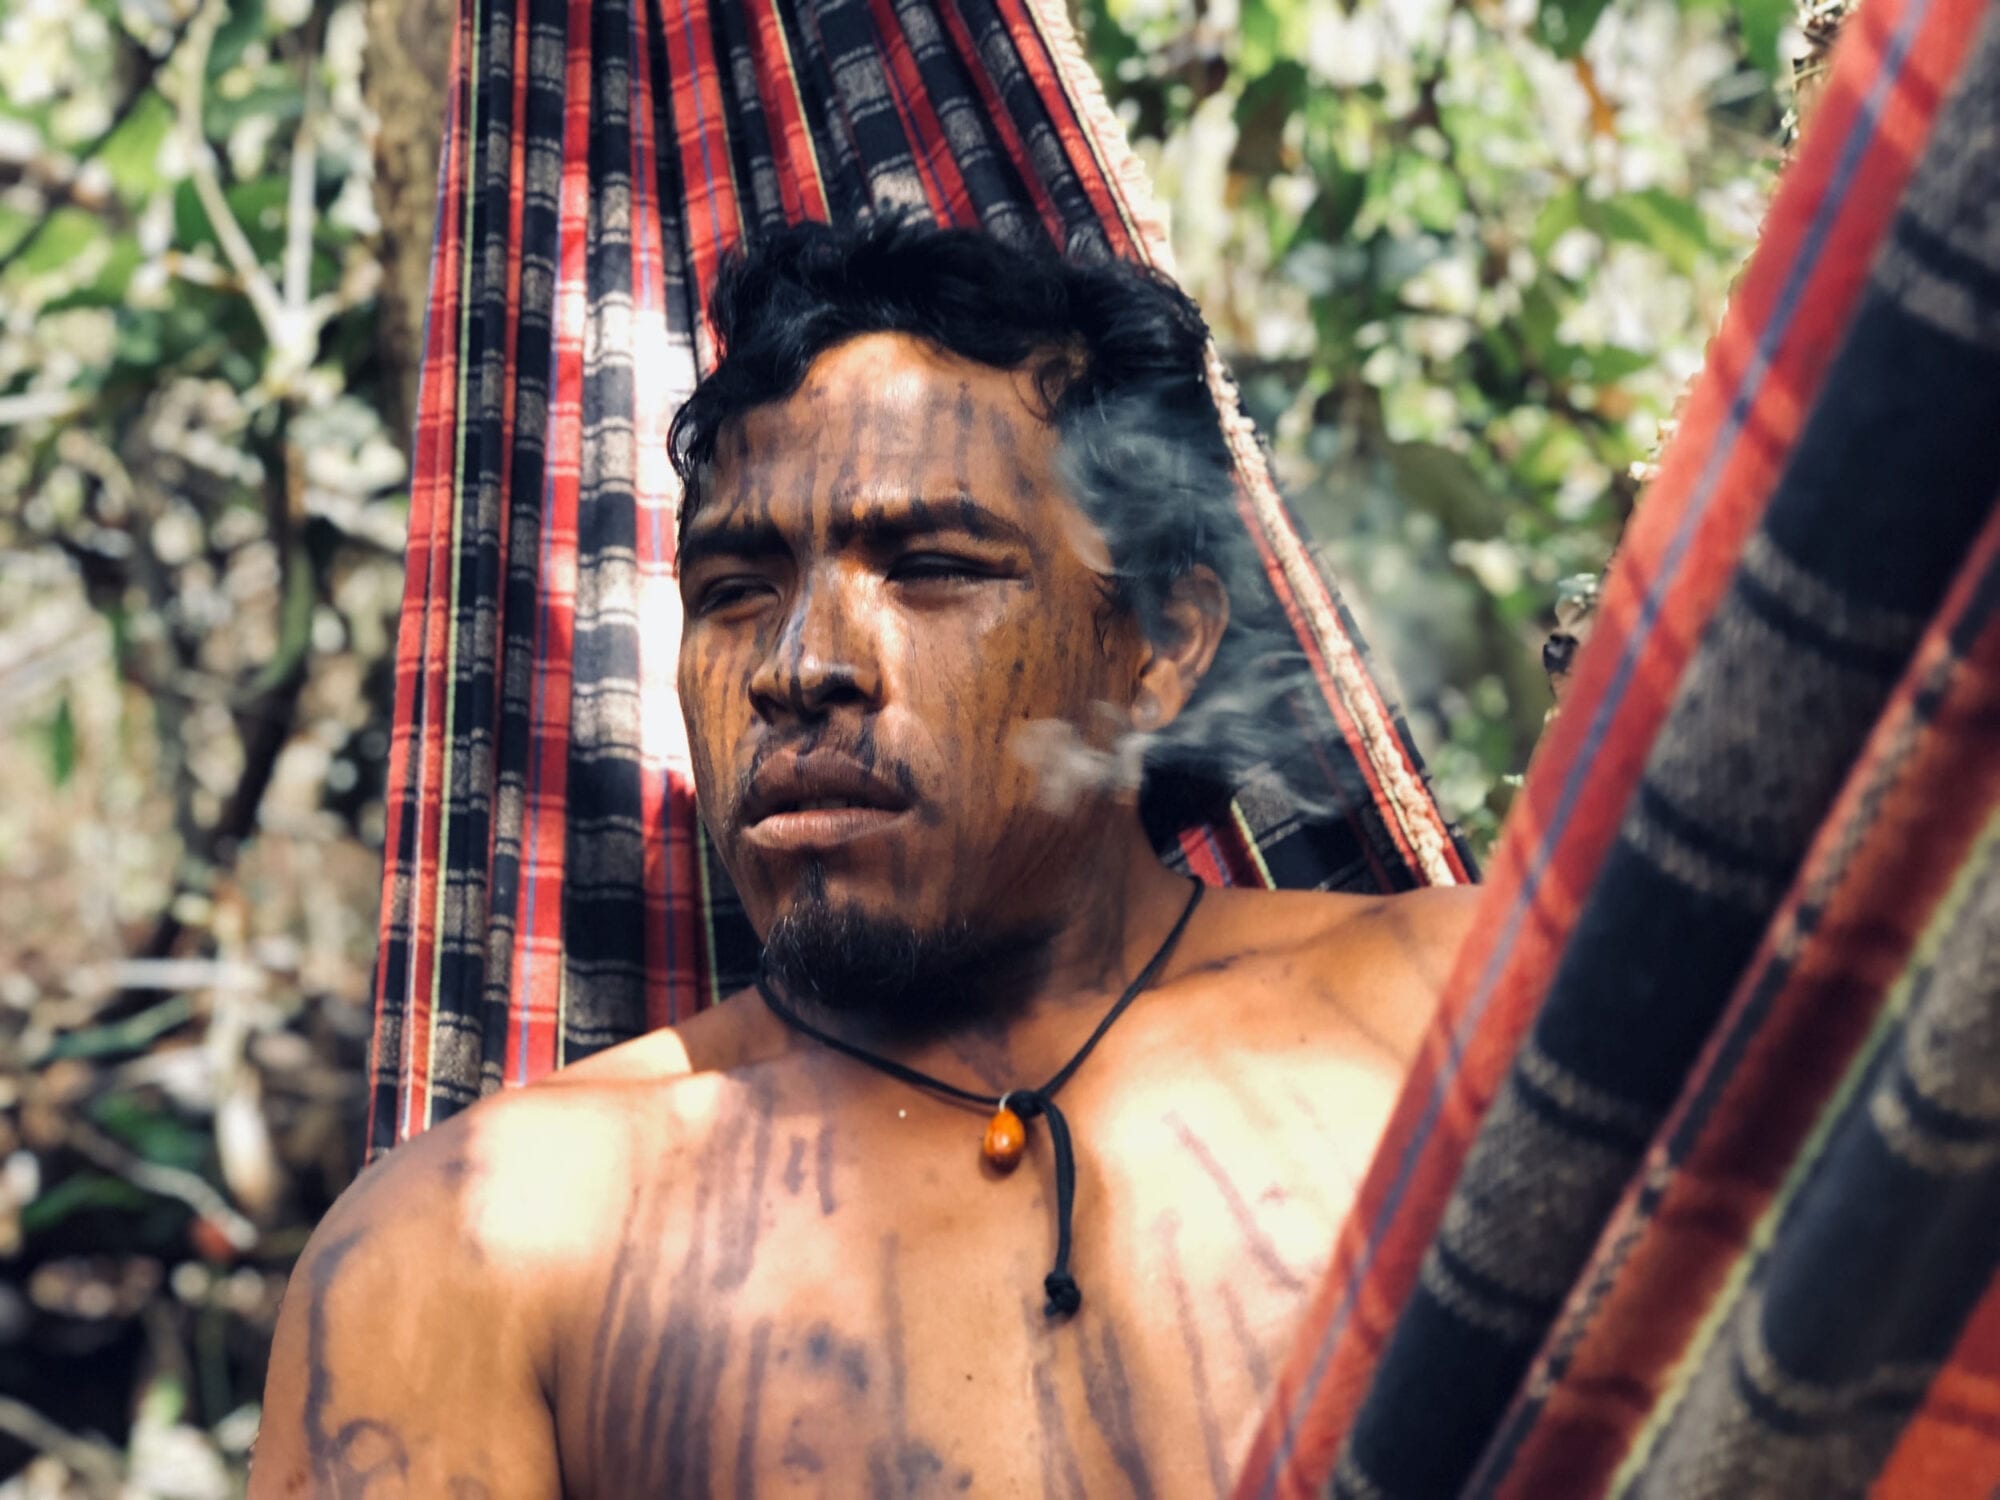 A young man with light brown skin sits in a colourful hammock, amongst thick foliage. He's topless, and his face and torso are painted or tattood in a vertical stripe pattern. He looks past the camera with a thoughful expression.